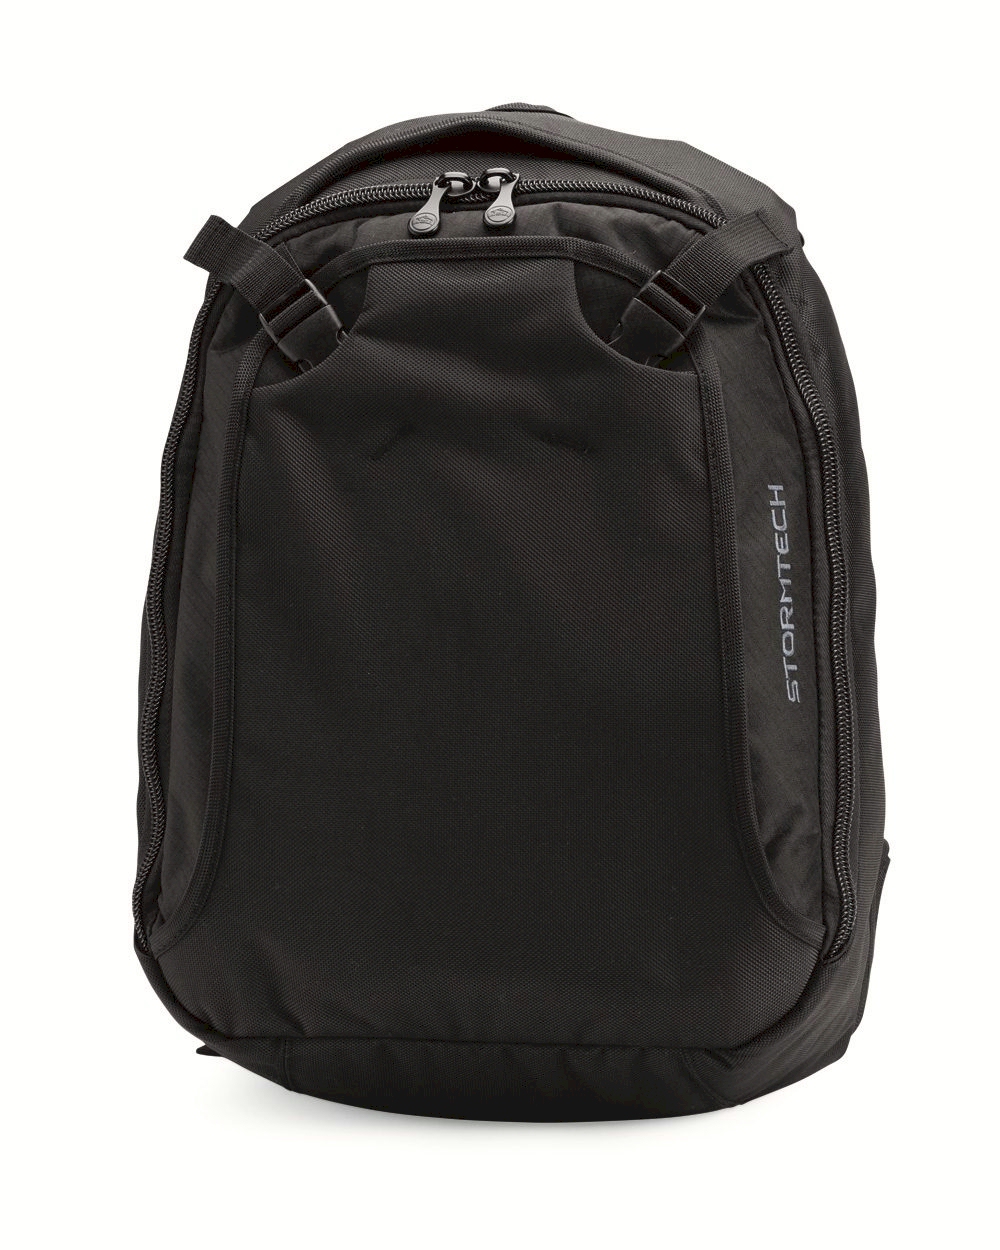 Logic Laptop Backpack by Stormtech Embroidery Blanks - BLACK